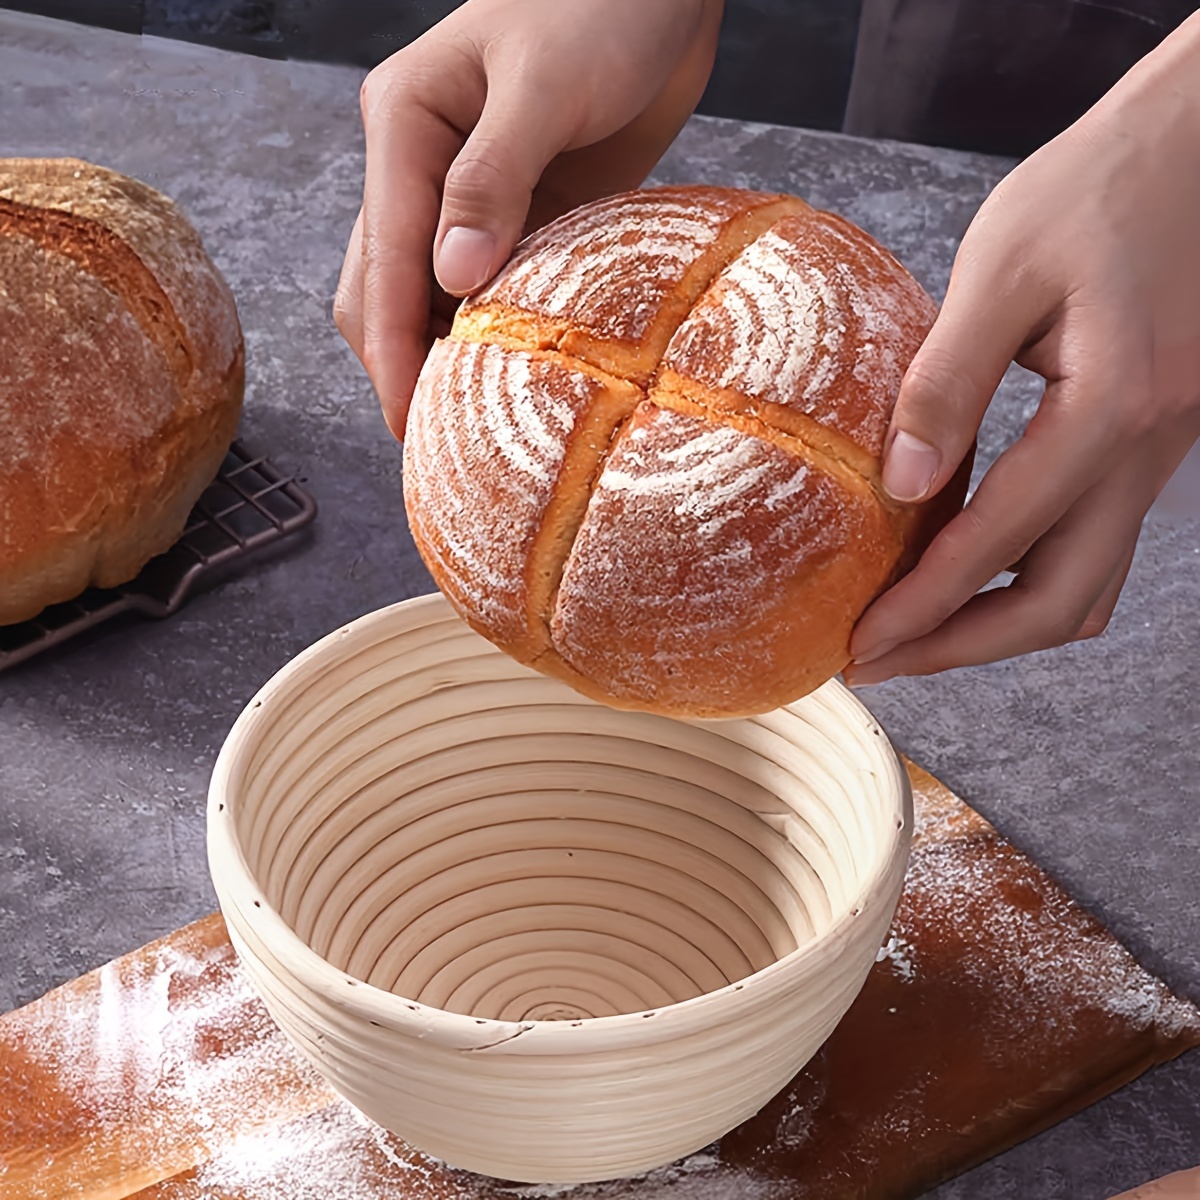 Silicone Bread Proofing Baskets Set of 2, 9 Inch Round & 10 Inch Oval  Sourdough Banneton Basket Bread Baking Supplies Sourdough Starter Kit  Include